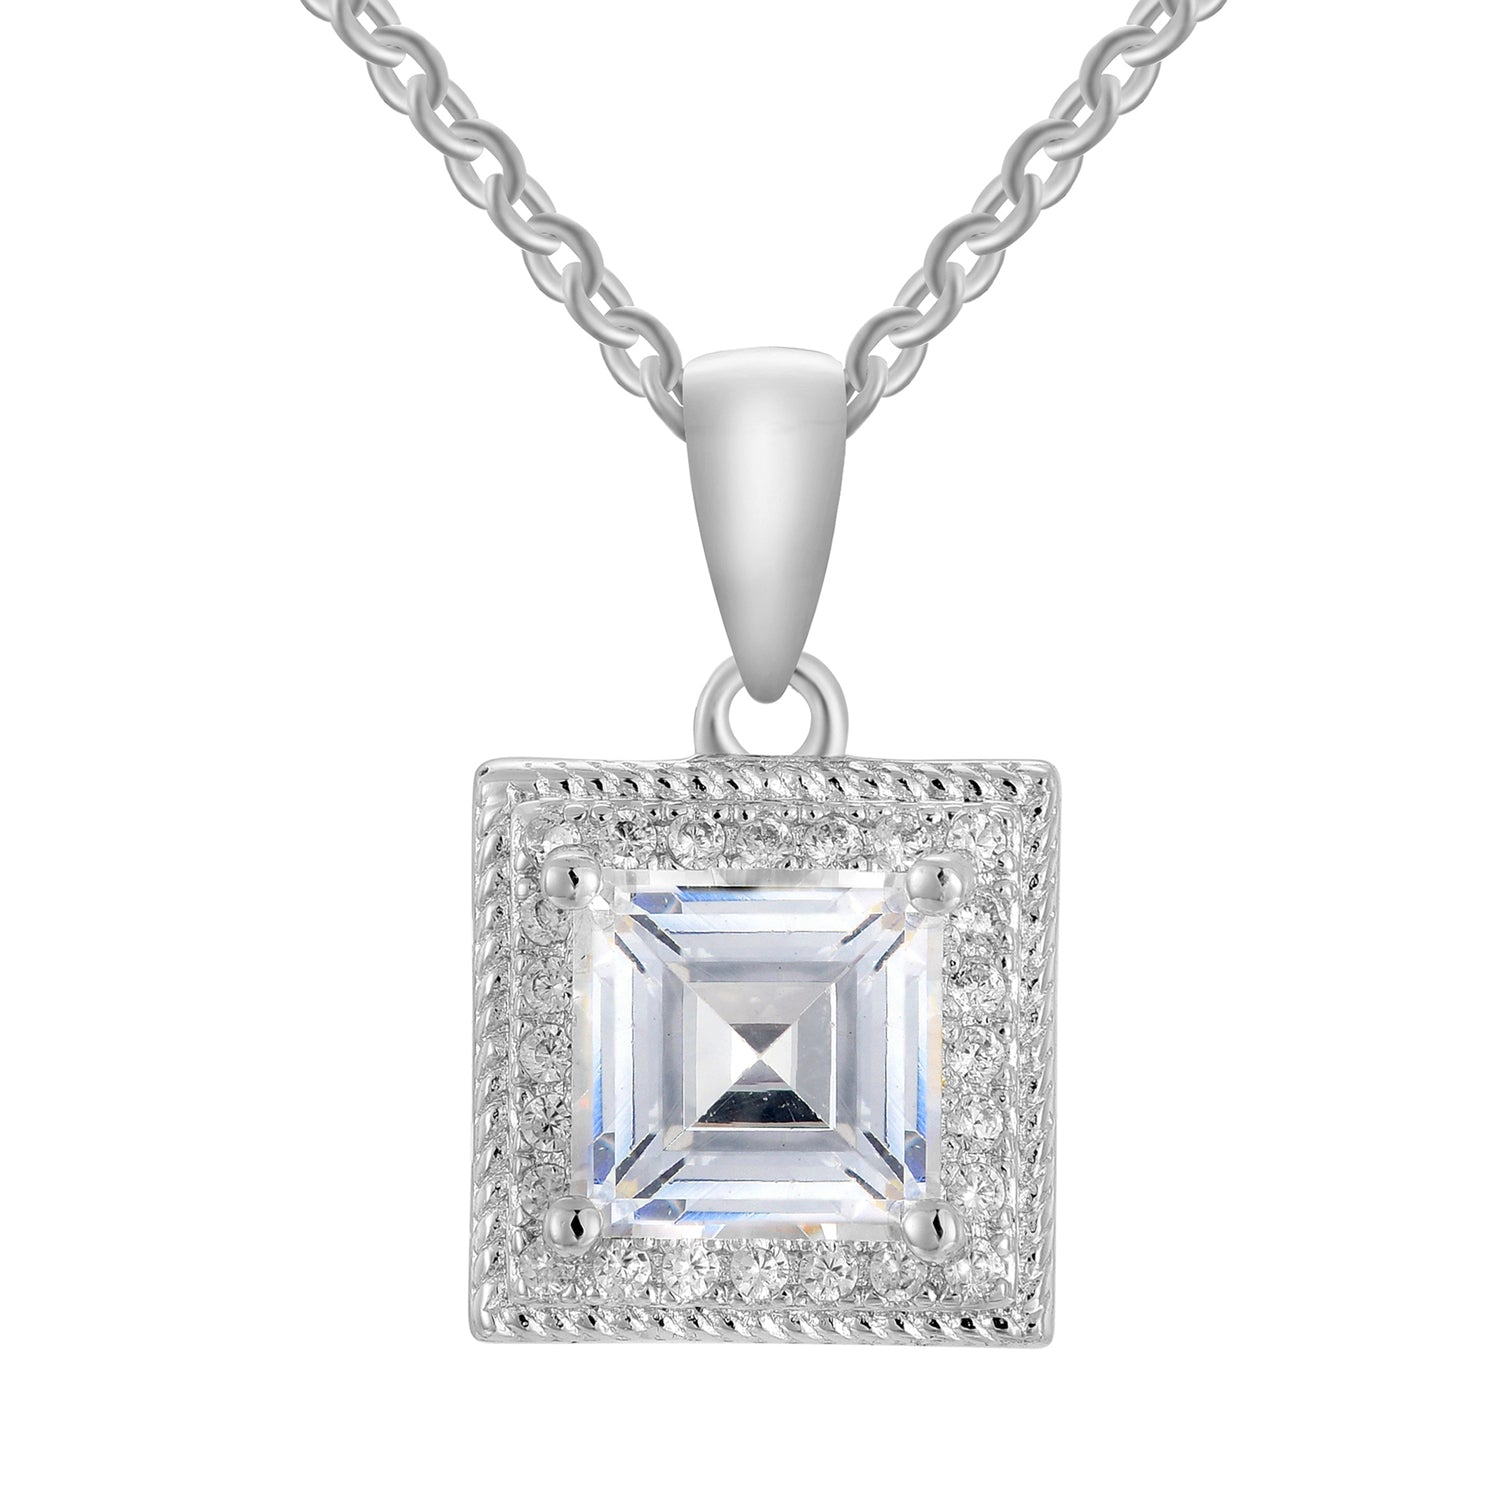 Madison 18k White Gold Plated Silver Necklace with Princess Cut Simulated Diamond CZ Crystals